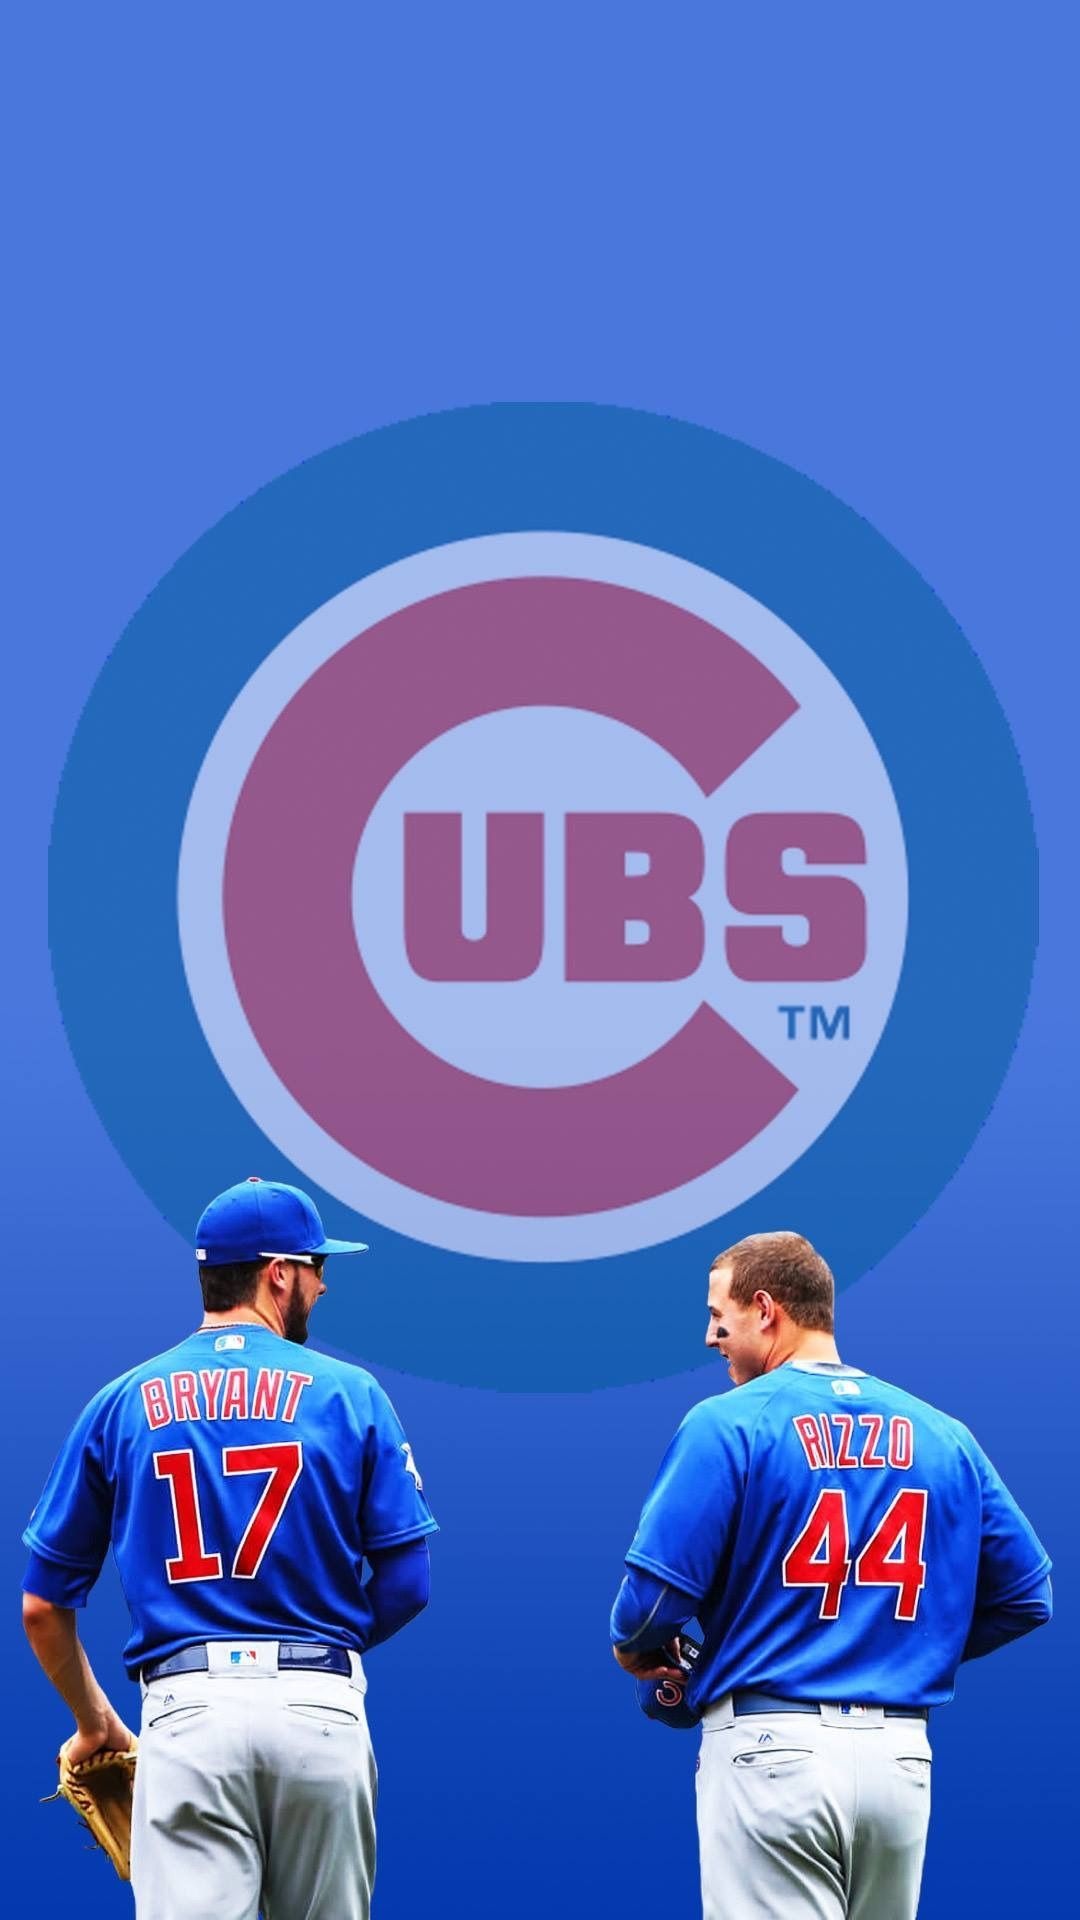 Kris Bryant, Cubs wallpapers, iPhone, Chicago sports teams, 1080x1920 Full HD Handy